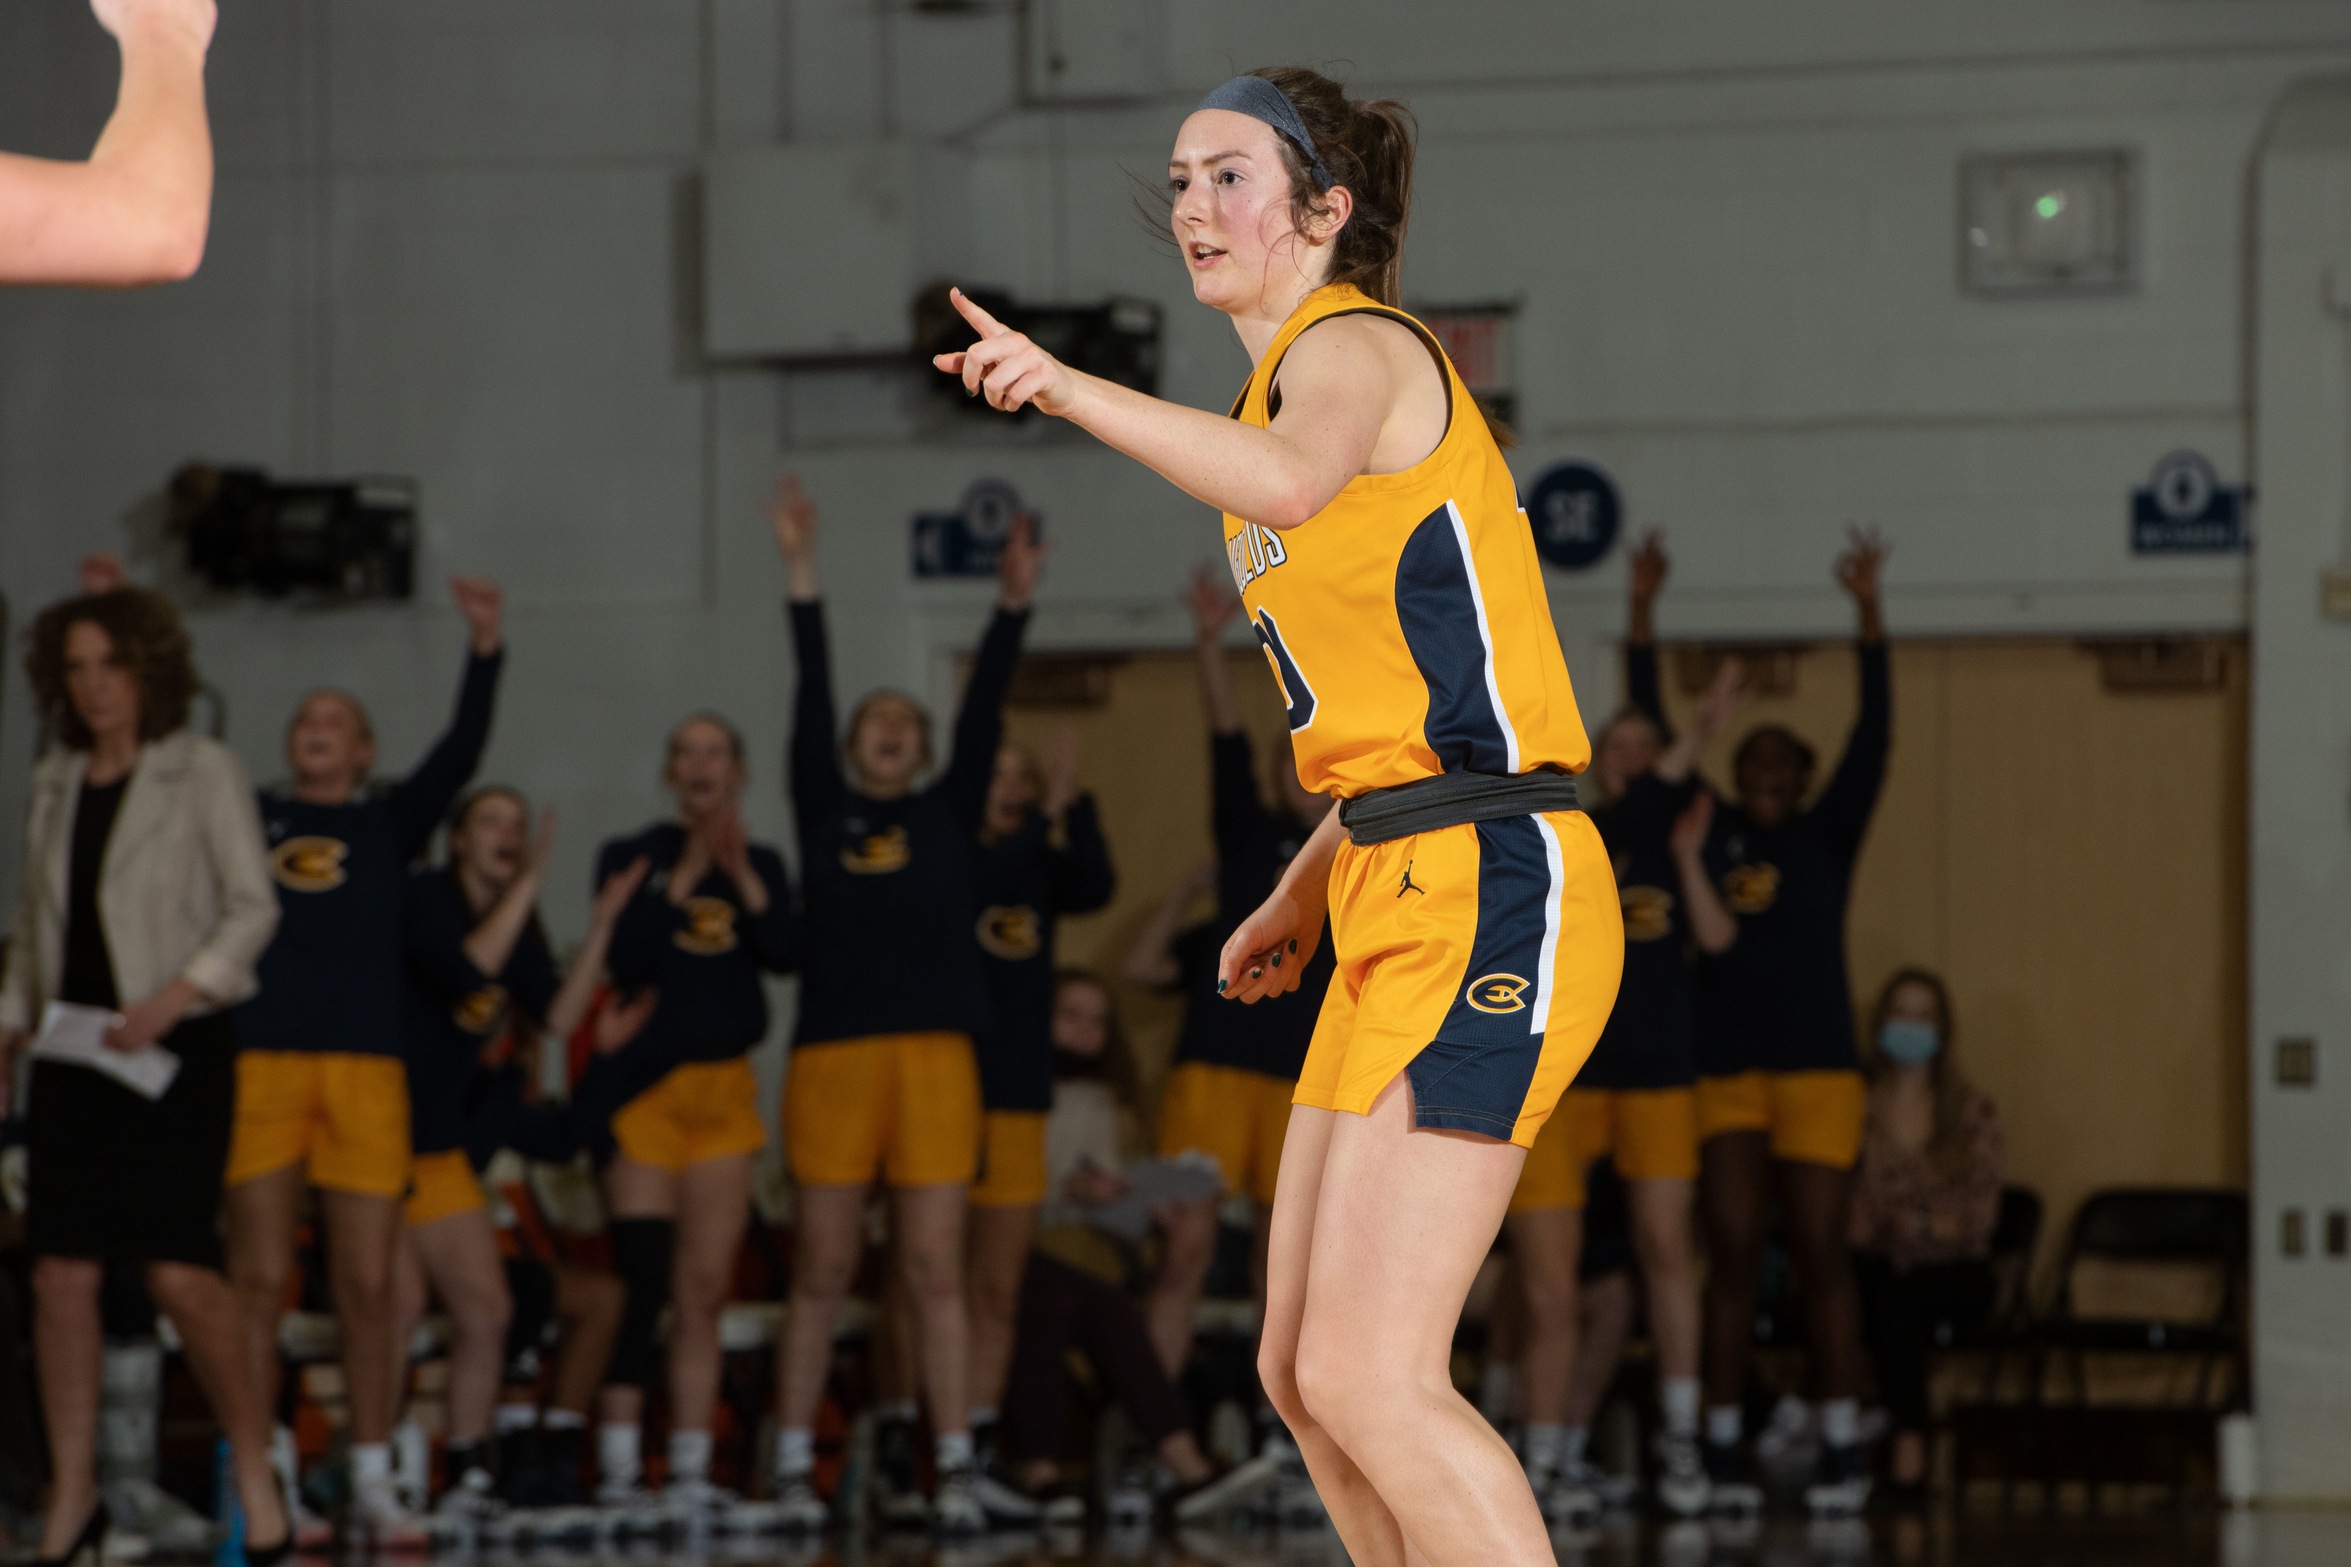 Ruden Scores 1,000th Point as Blugolds Defeat St. Norbert